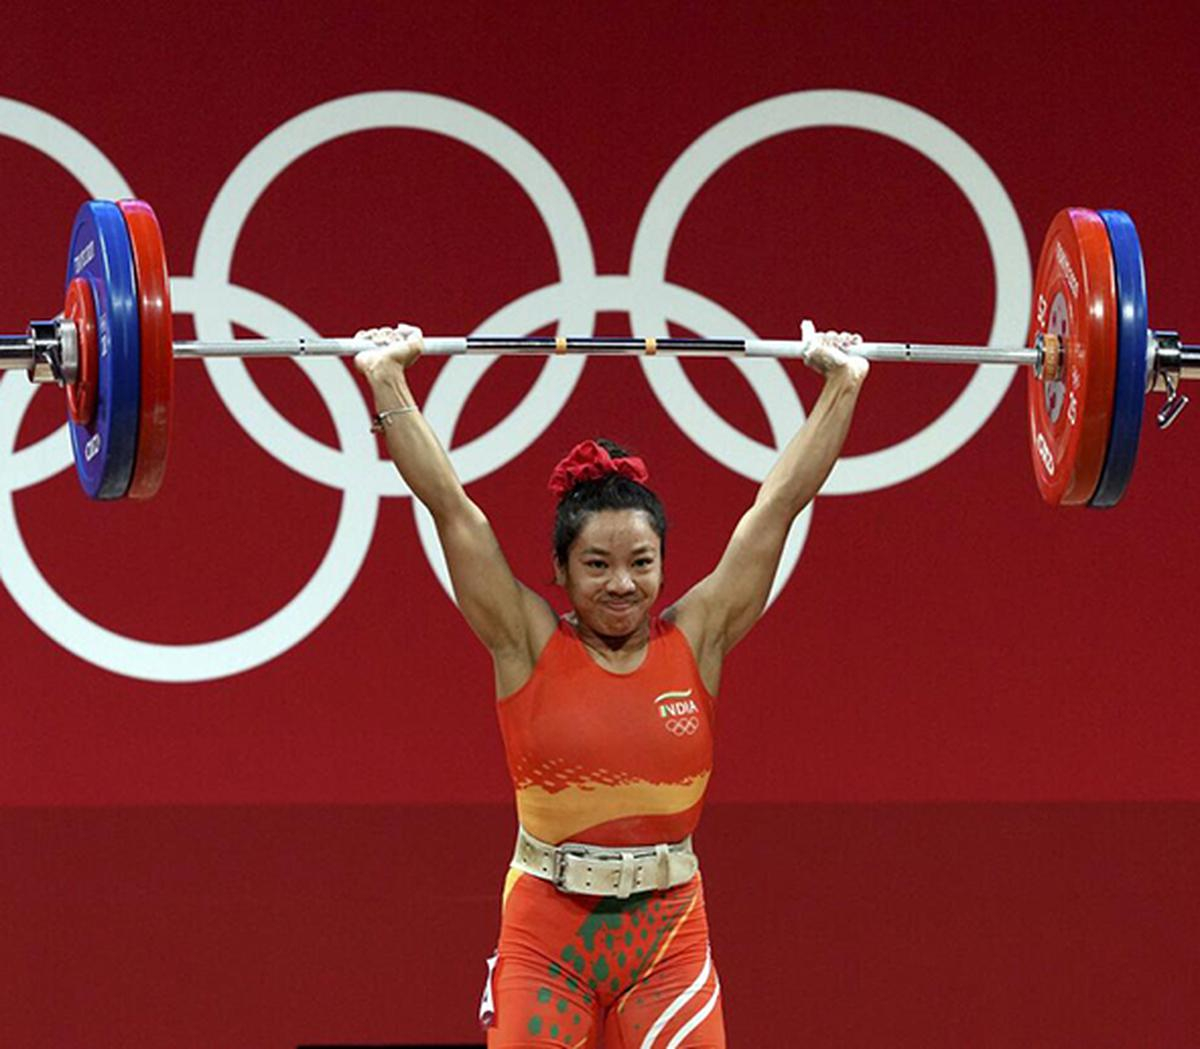 Commonwealth Games 2022, Highlights Mirabai Chanu wins Gold in 49kg womens weightlifting Other News